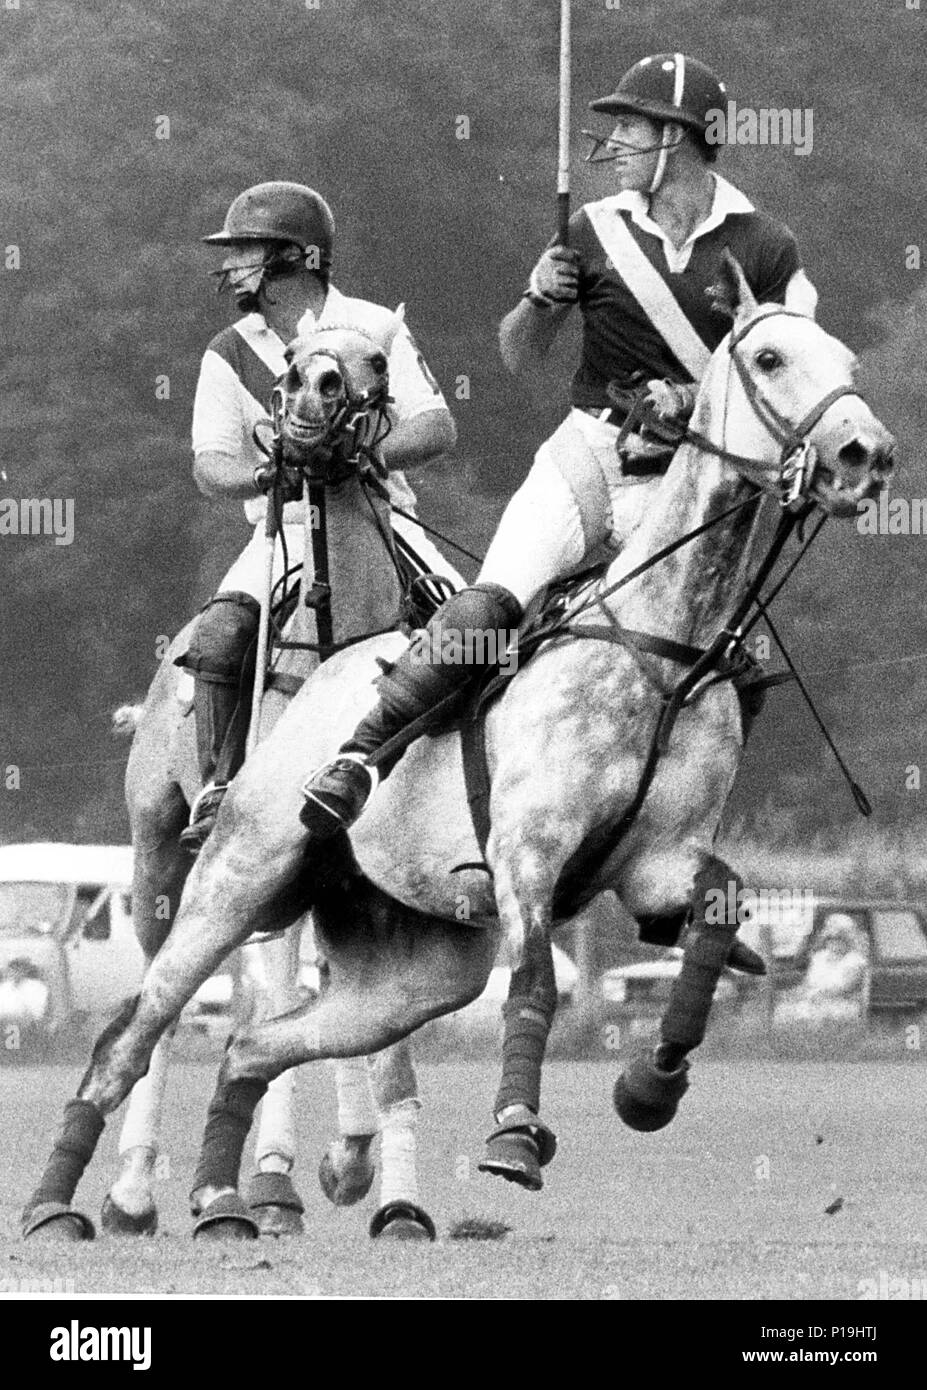 PRINCE CHARLES IN ACTION ON THE POLO FIELD AT COWDRAY PARK, MIDHURST. Stock Photo